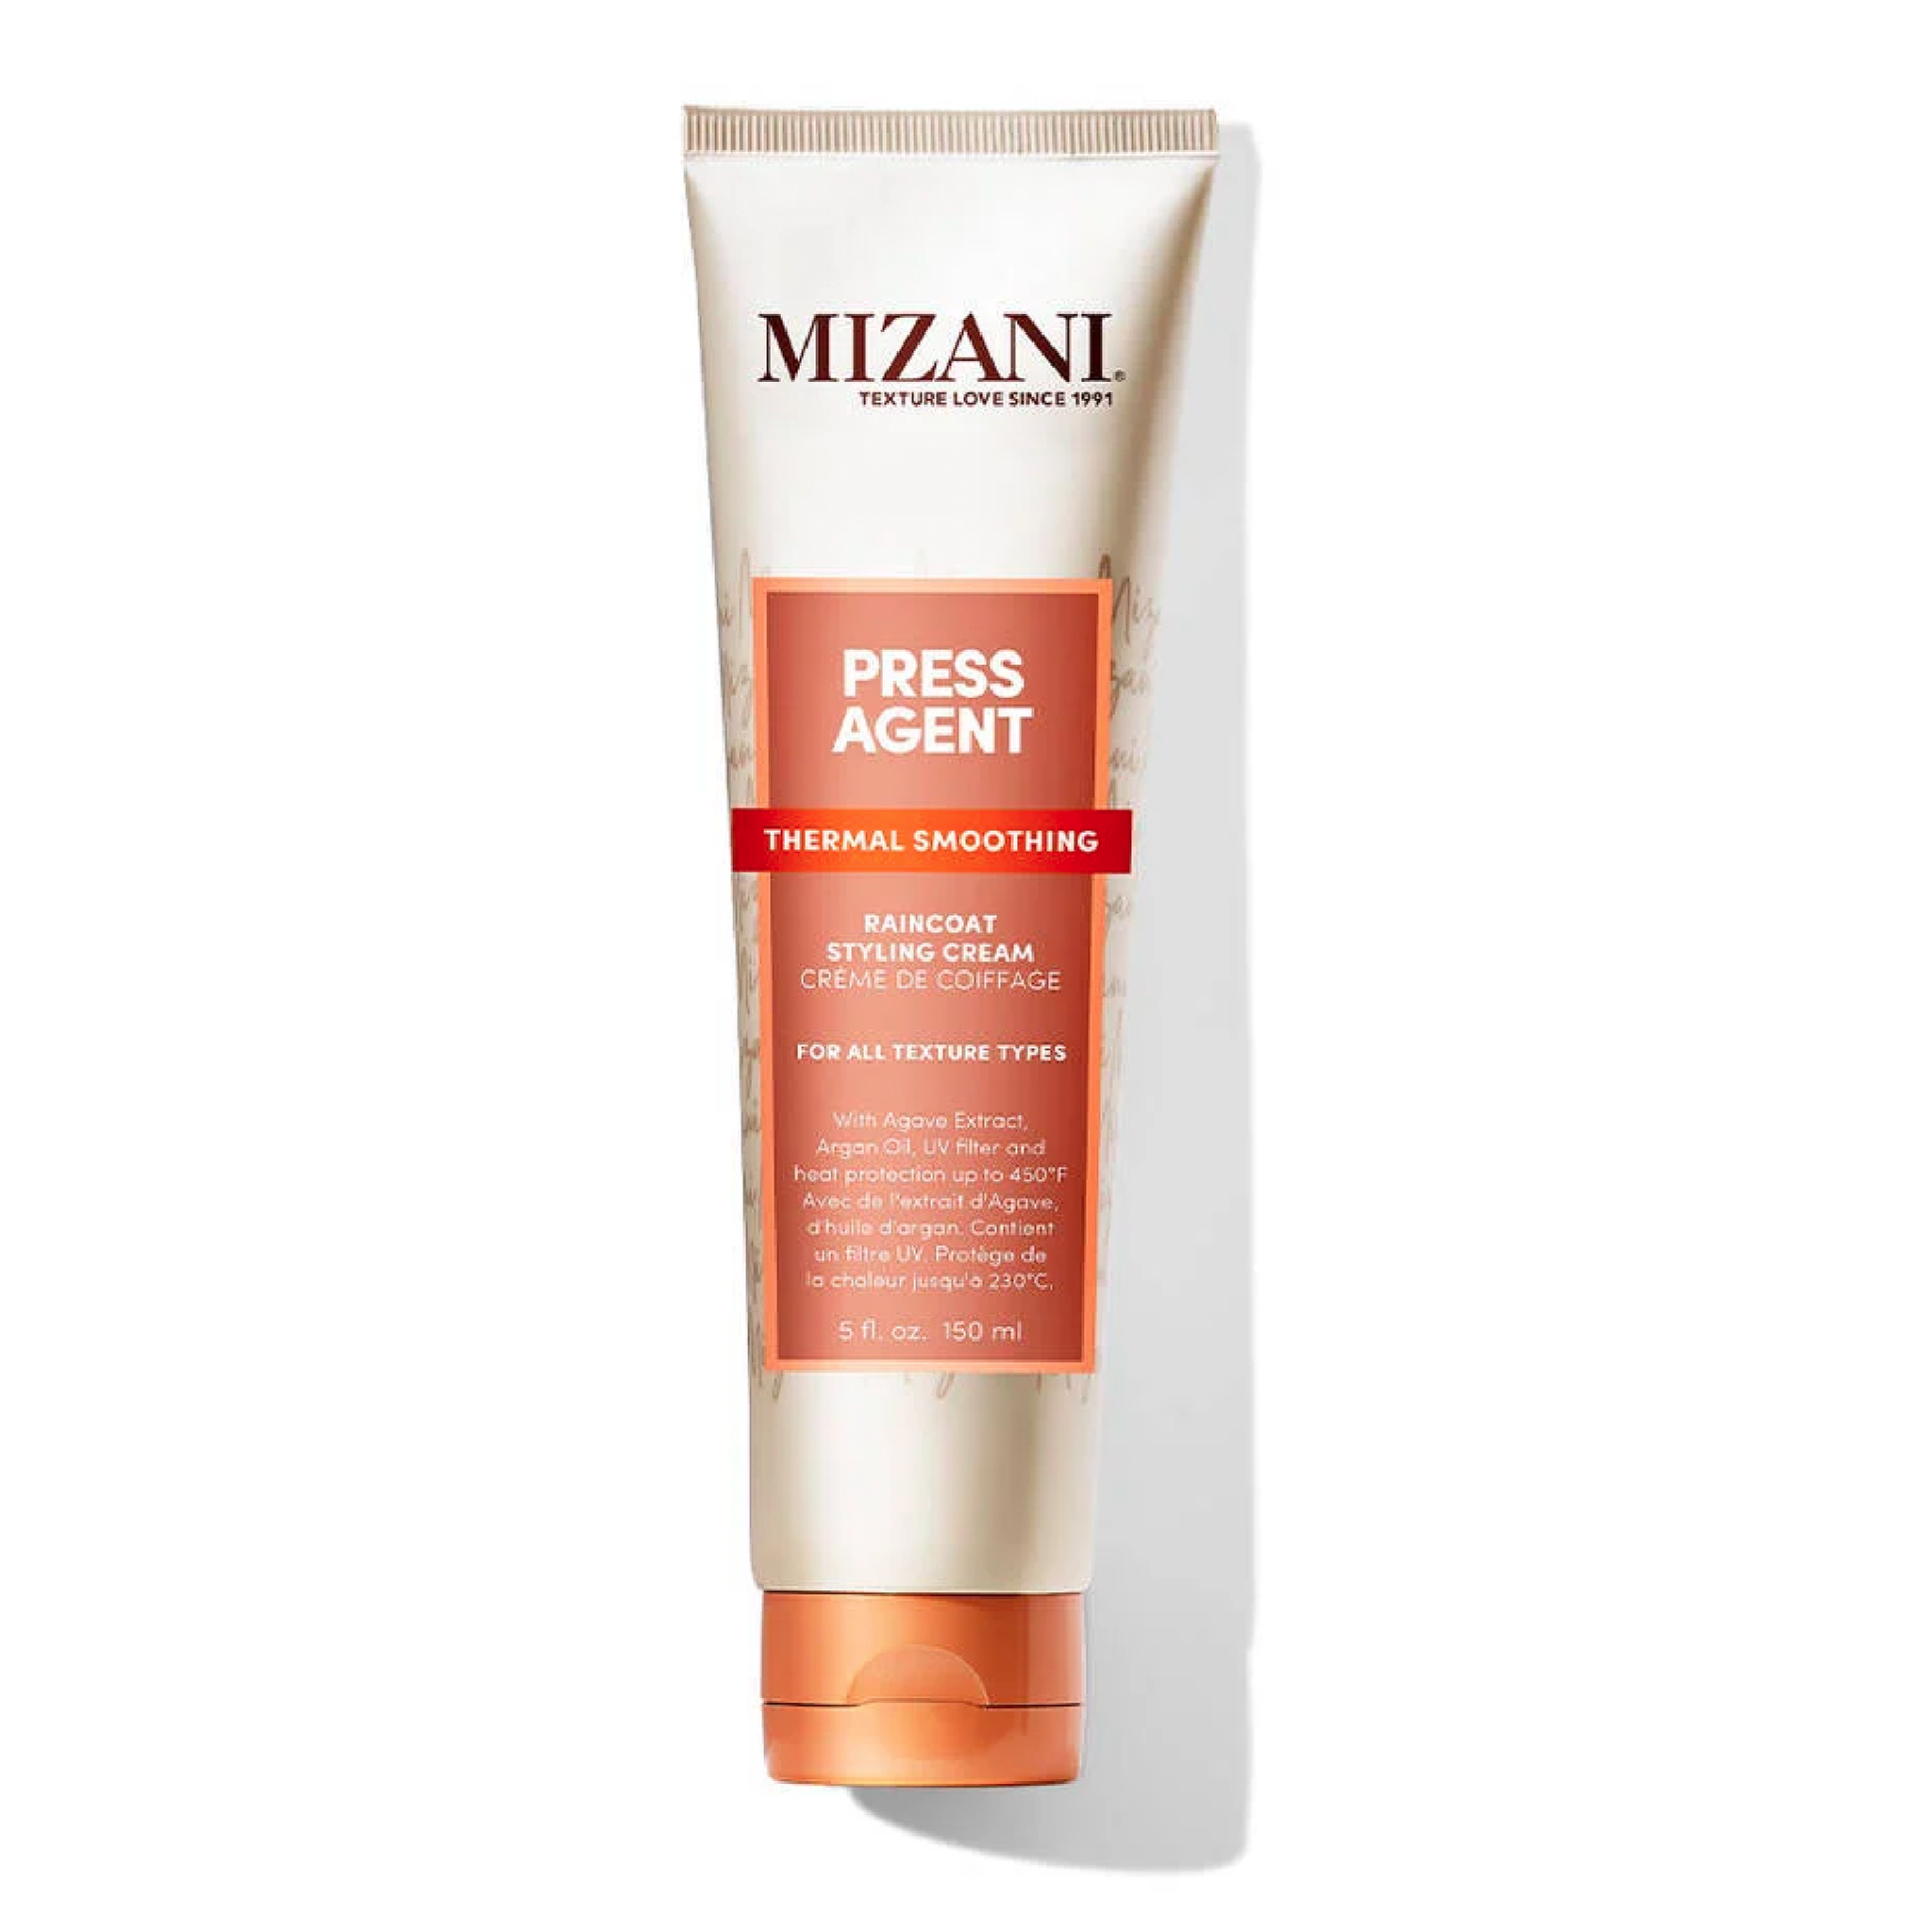 Press Agent Thermal Smoothing Raincoat Styling Cream